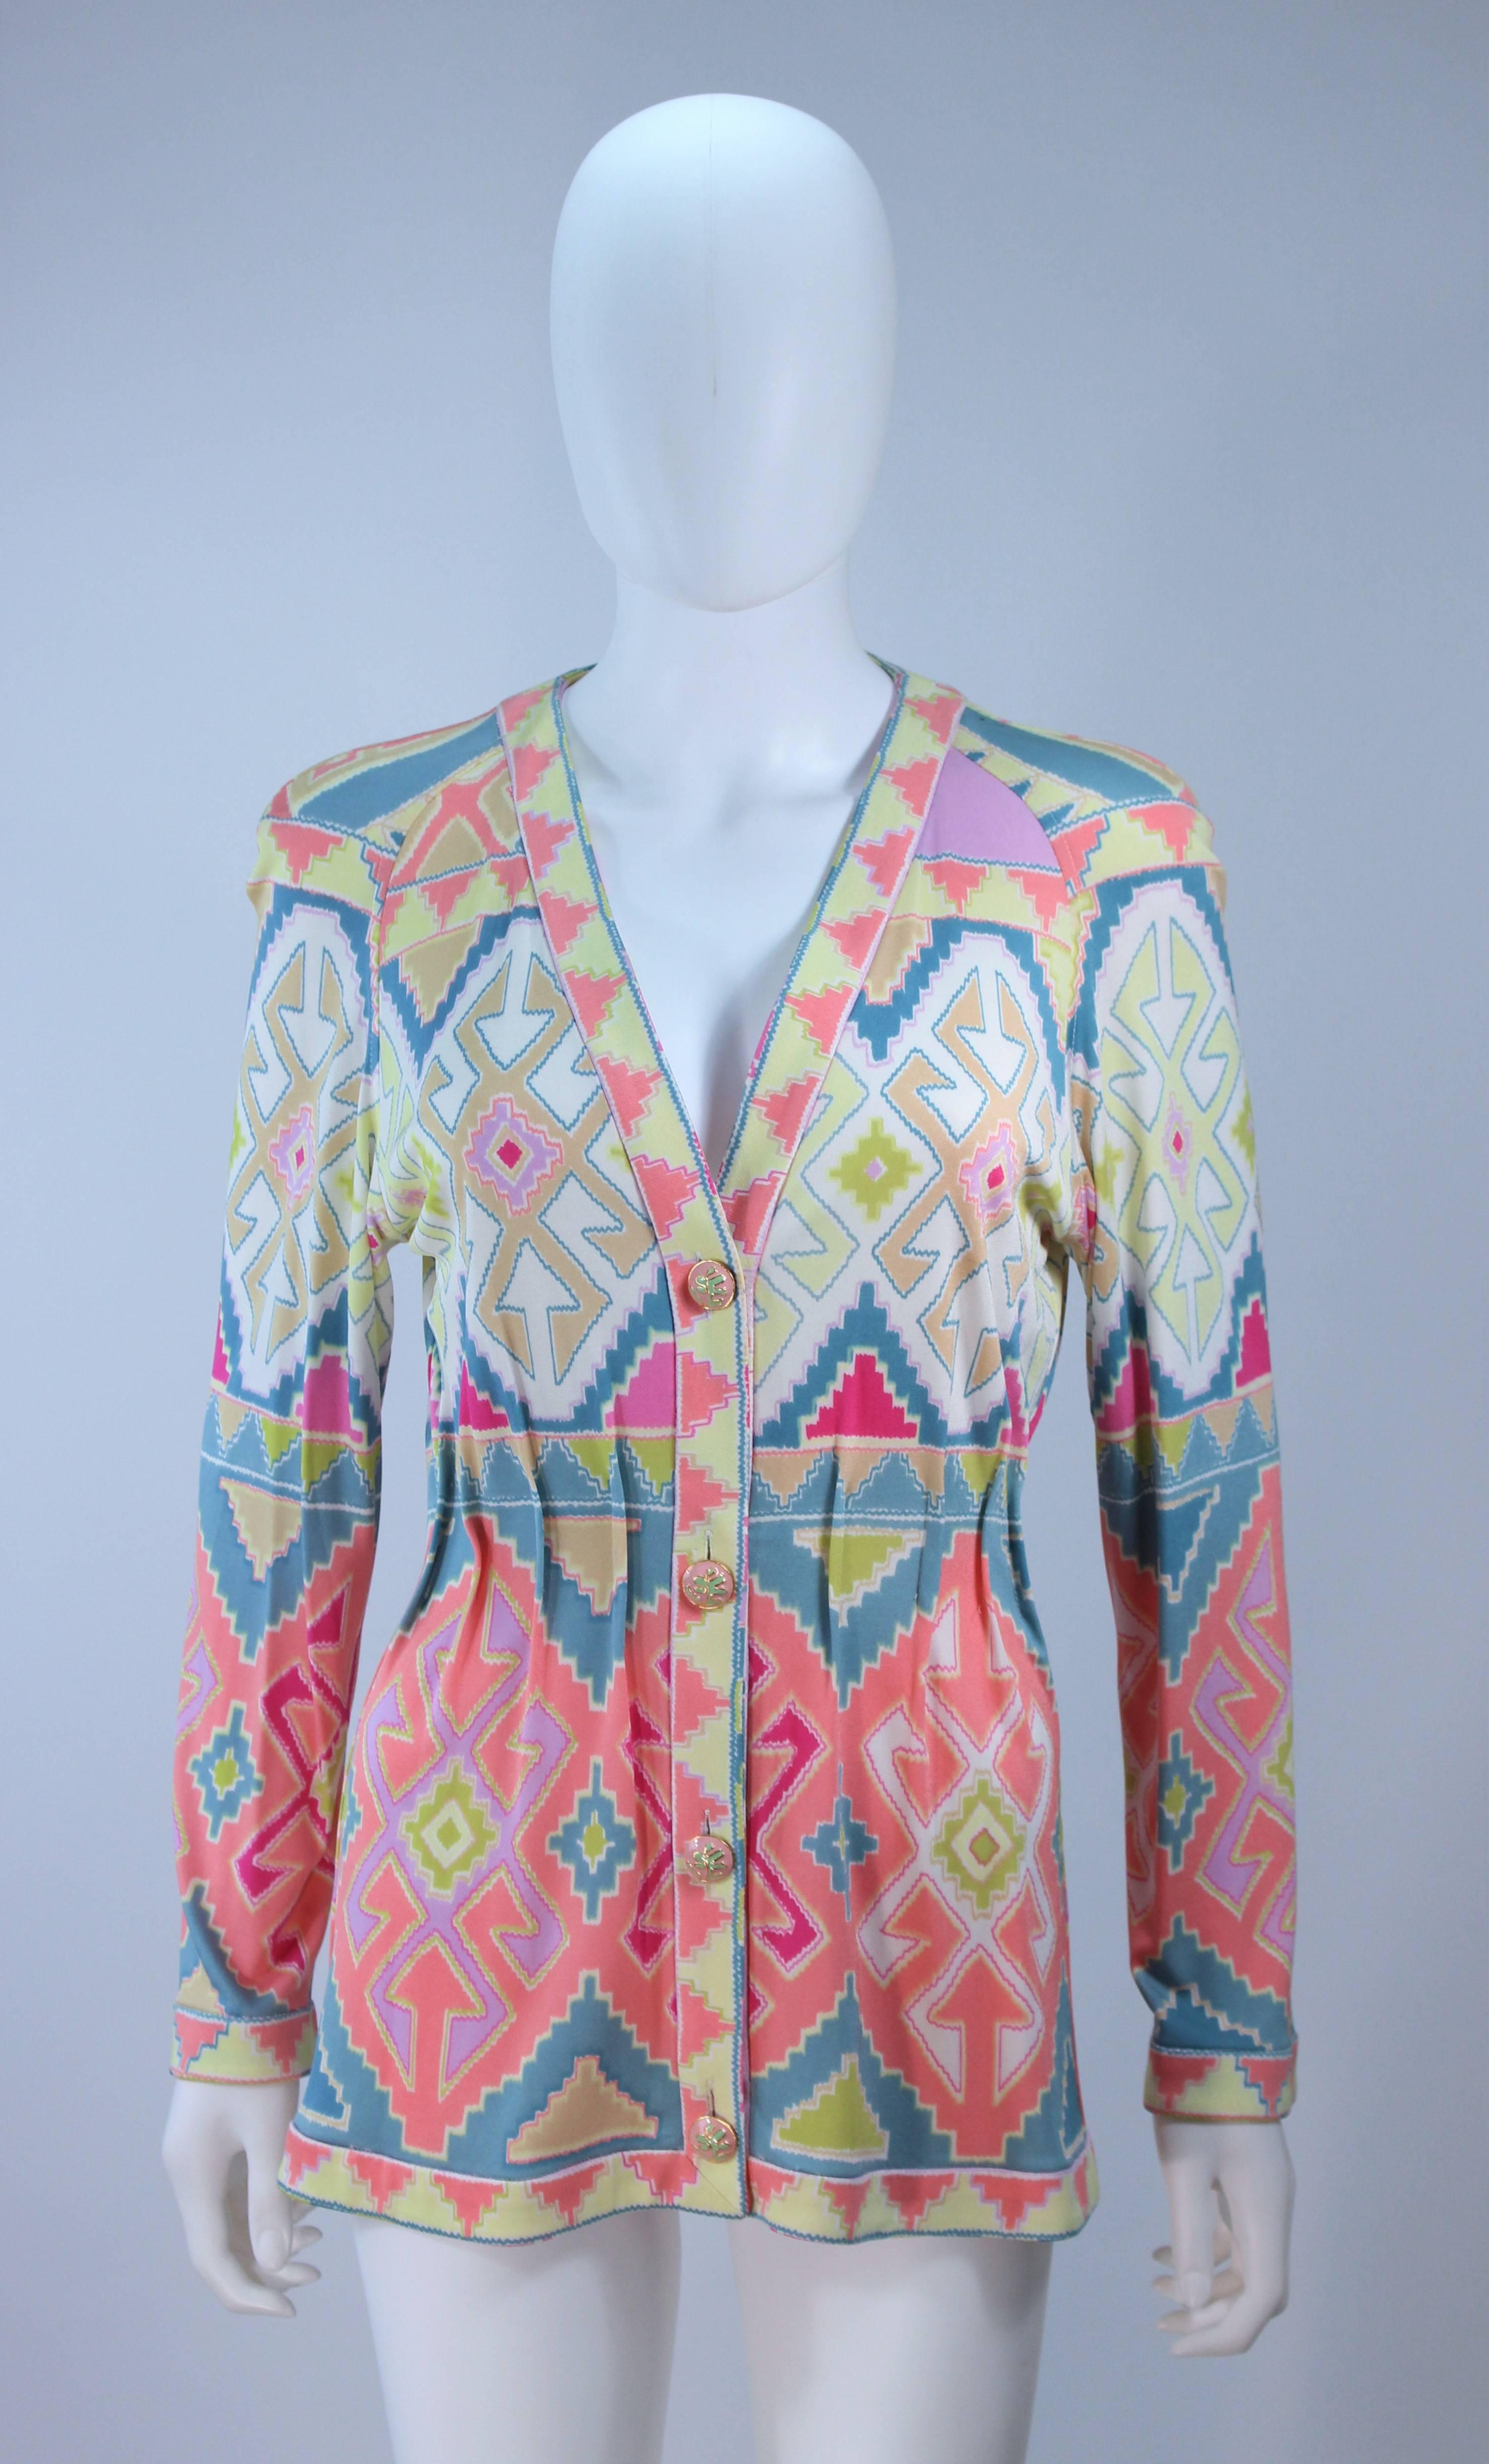 UNGARO Silk Printed Jersey Set with Leggings and Blouse Enamel Buttons Size 4 6 3